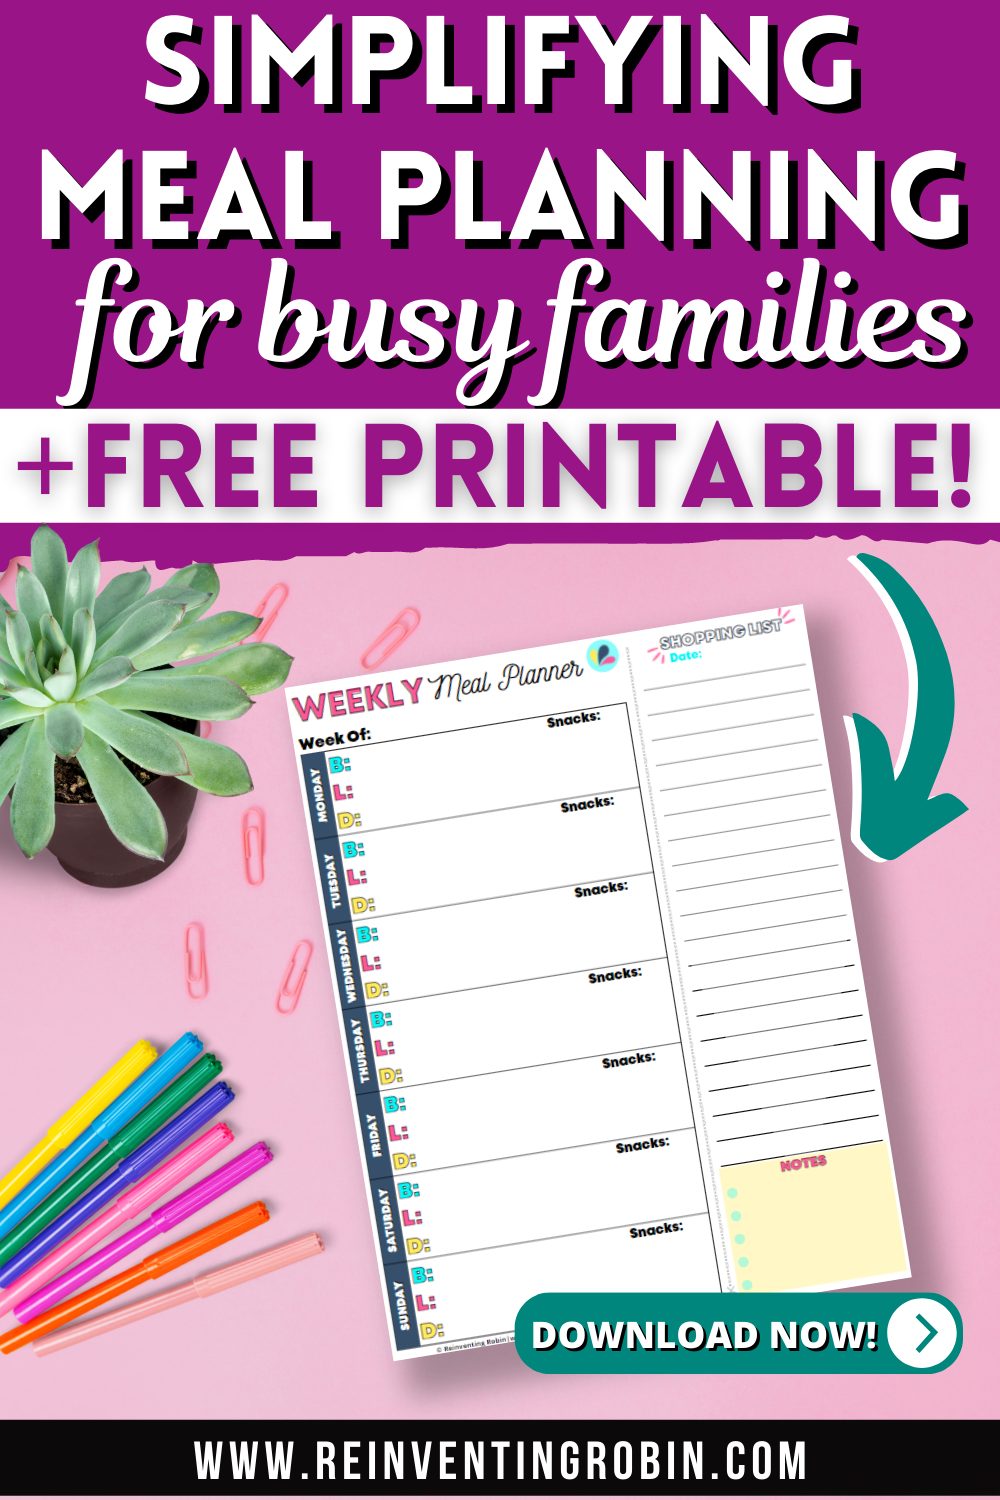 Has a picture of a Weekly Meal Planner printable page that you can download for free, sitting on a table top with some markers, a succulent plant and paperclips. Title says Simplifying Meal Planning for busy families + Free Printable! Download Now! www.reinventingrobin.com